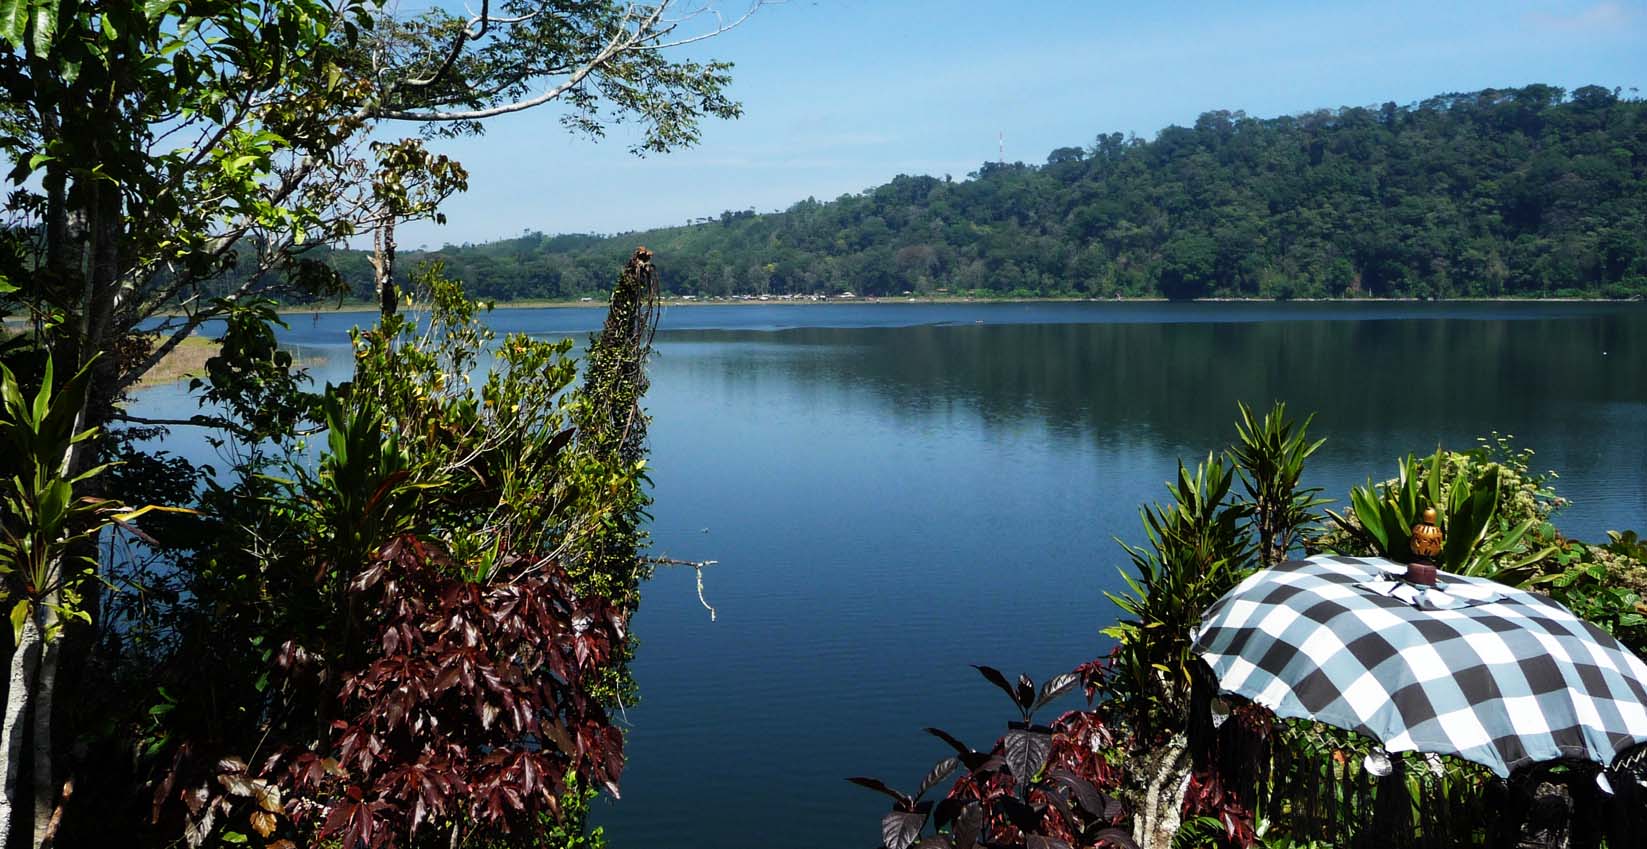 Lakes serve as catchments for most of Bali's water